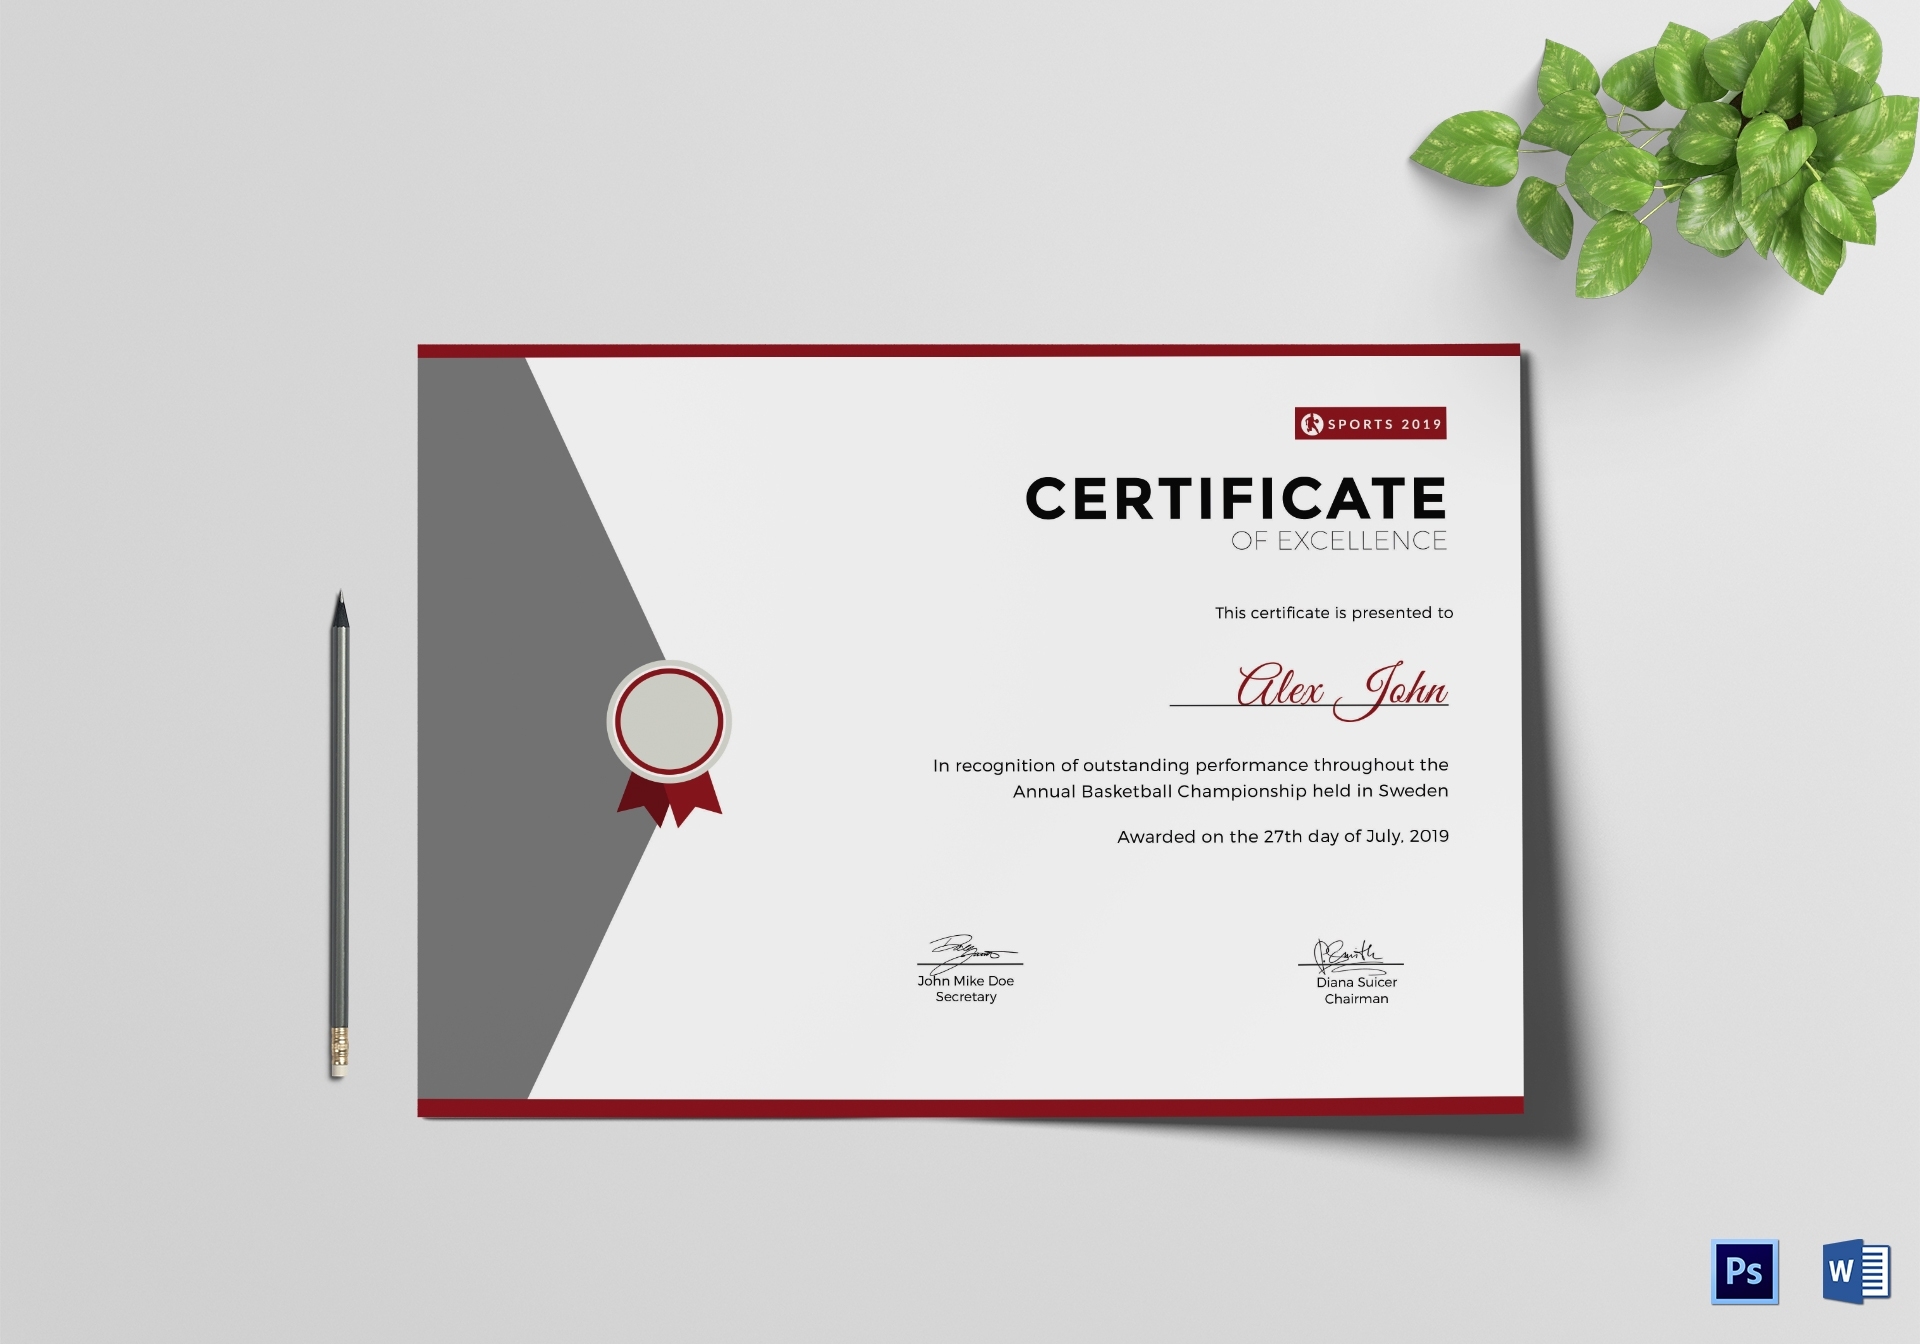 Prize Excellence Certificate Design Template In Psd, Word inside Award Of Excellence Certificate Template